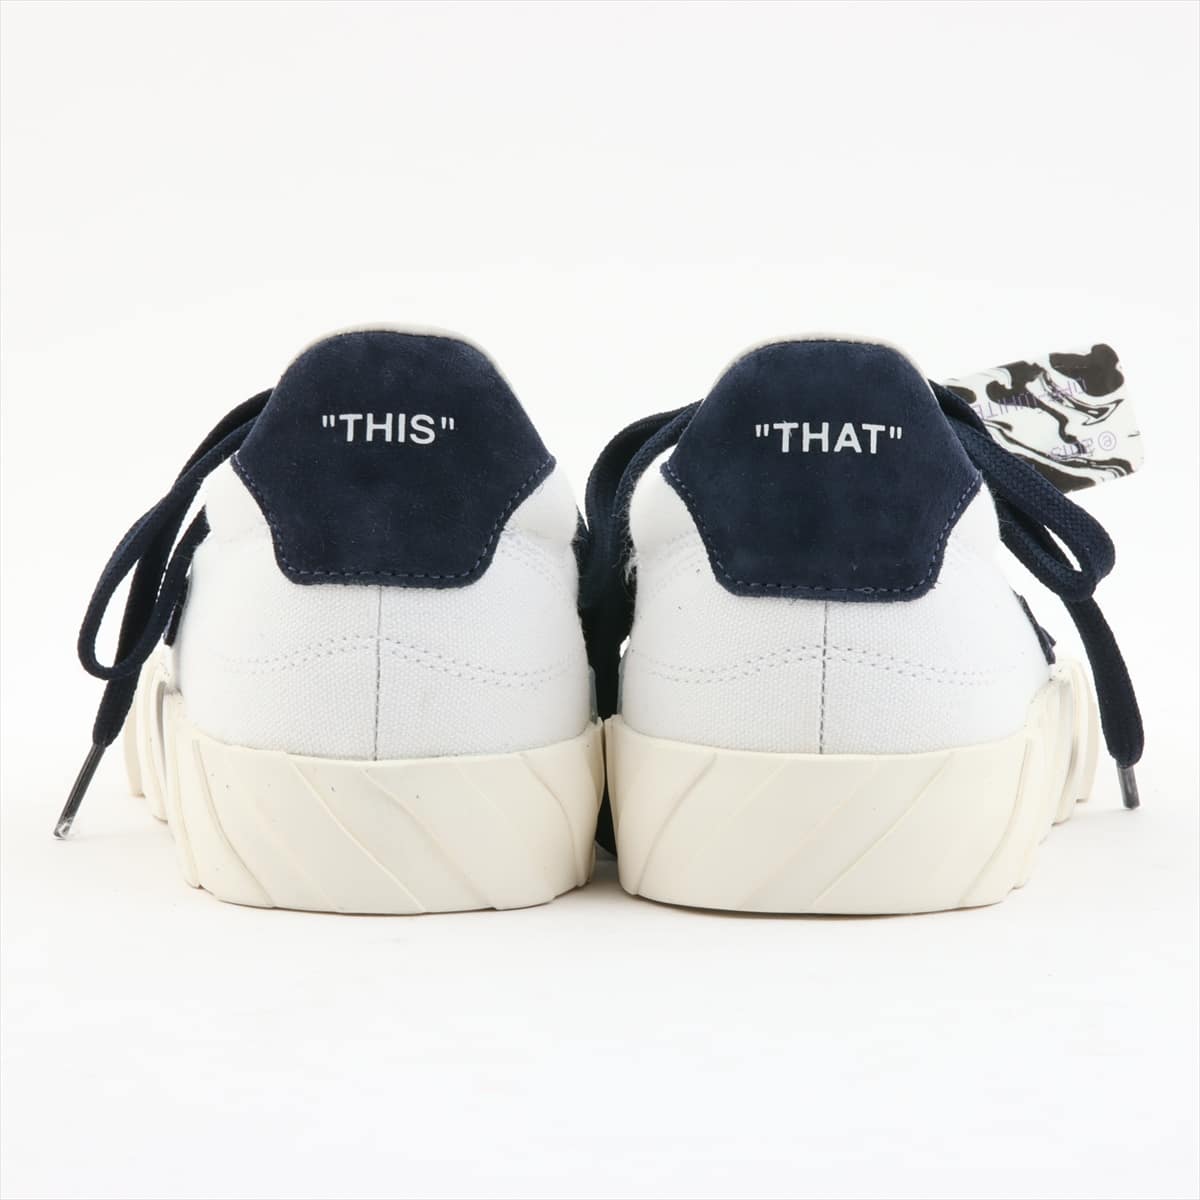 Off-White Suede x canvas Sneakers 40 Men's White x navy Vulcanize